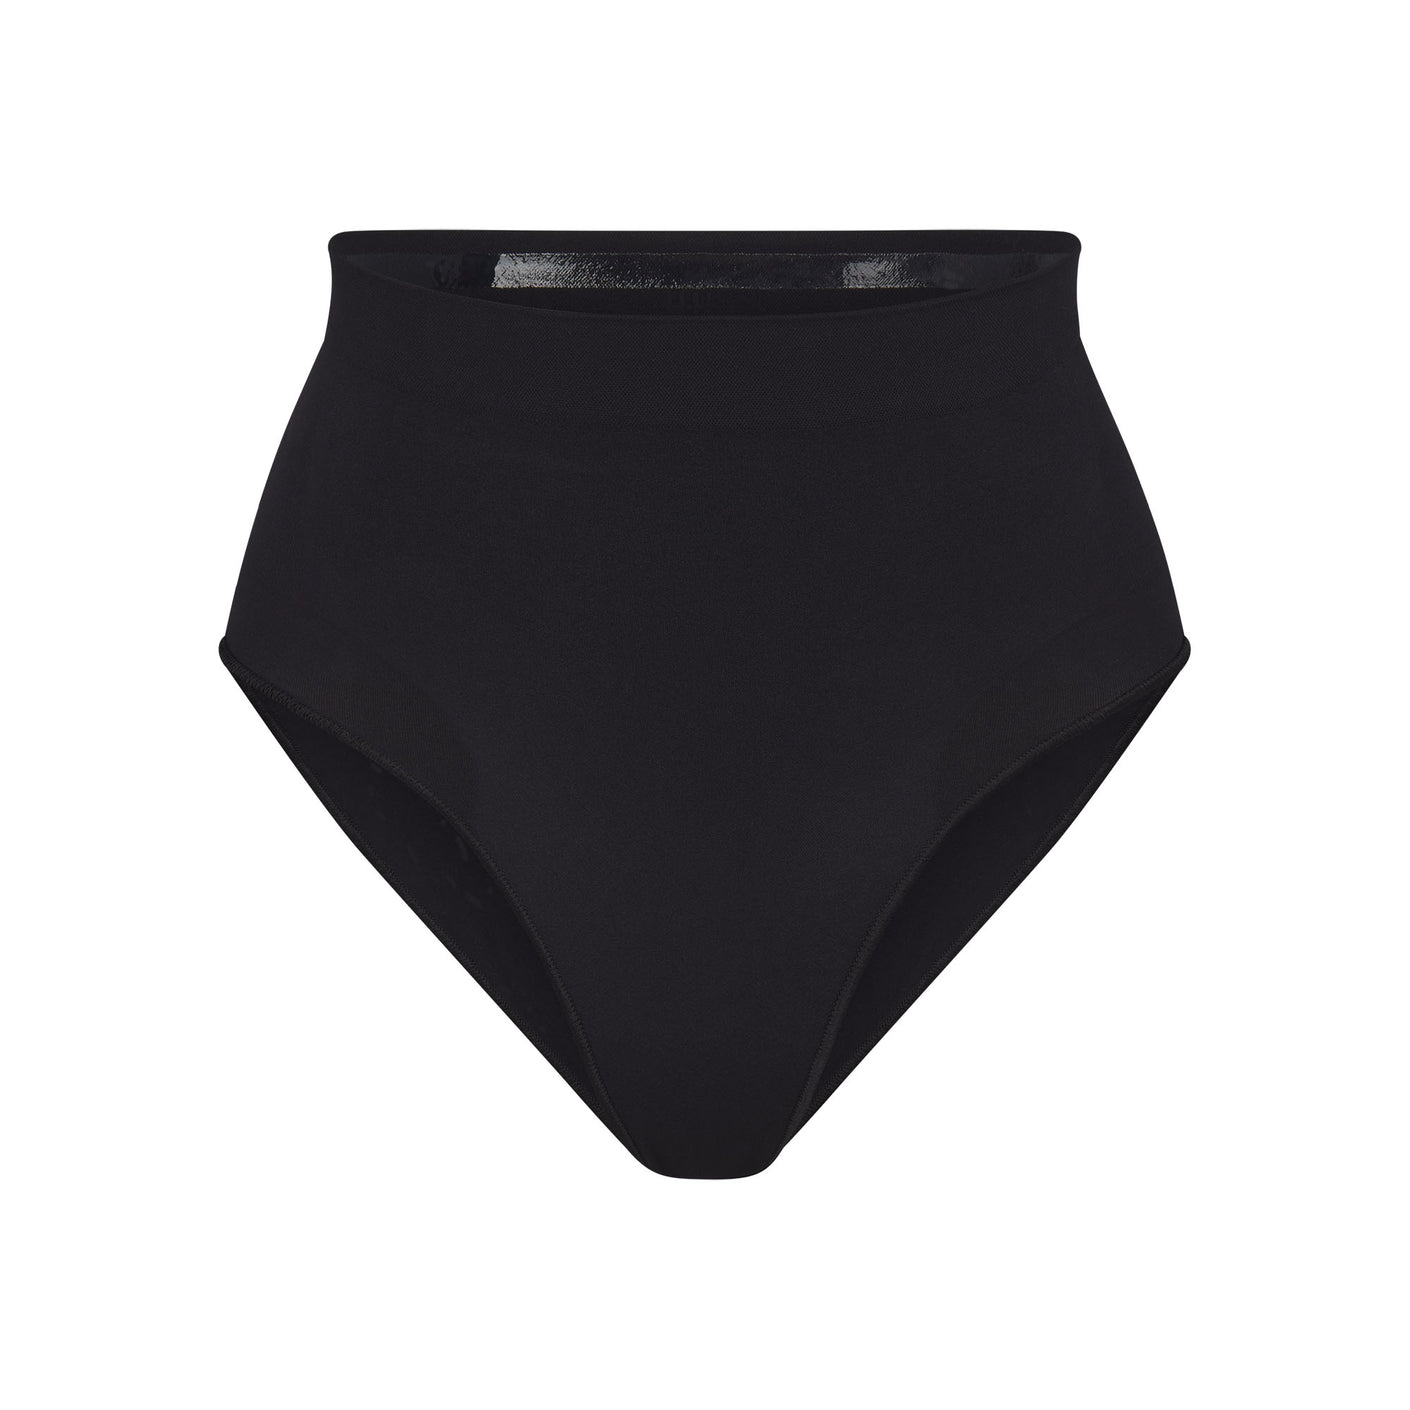 The exhaustive guide to underwear that will sculpt and smooth